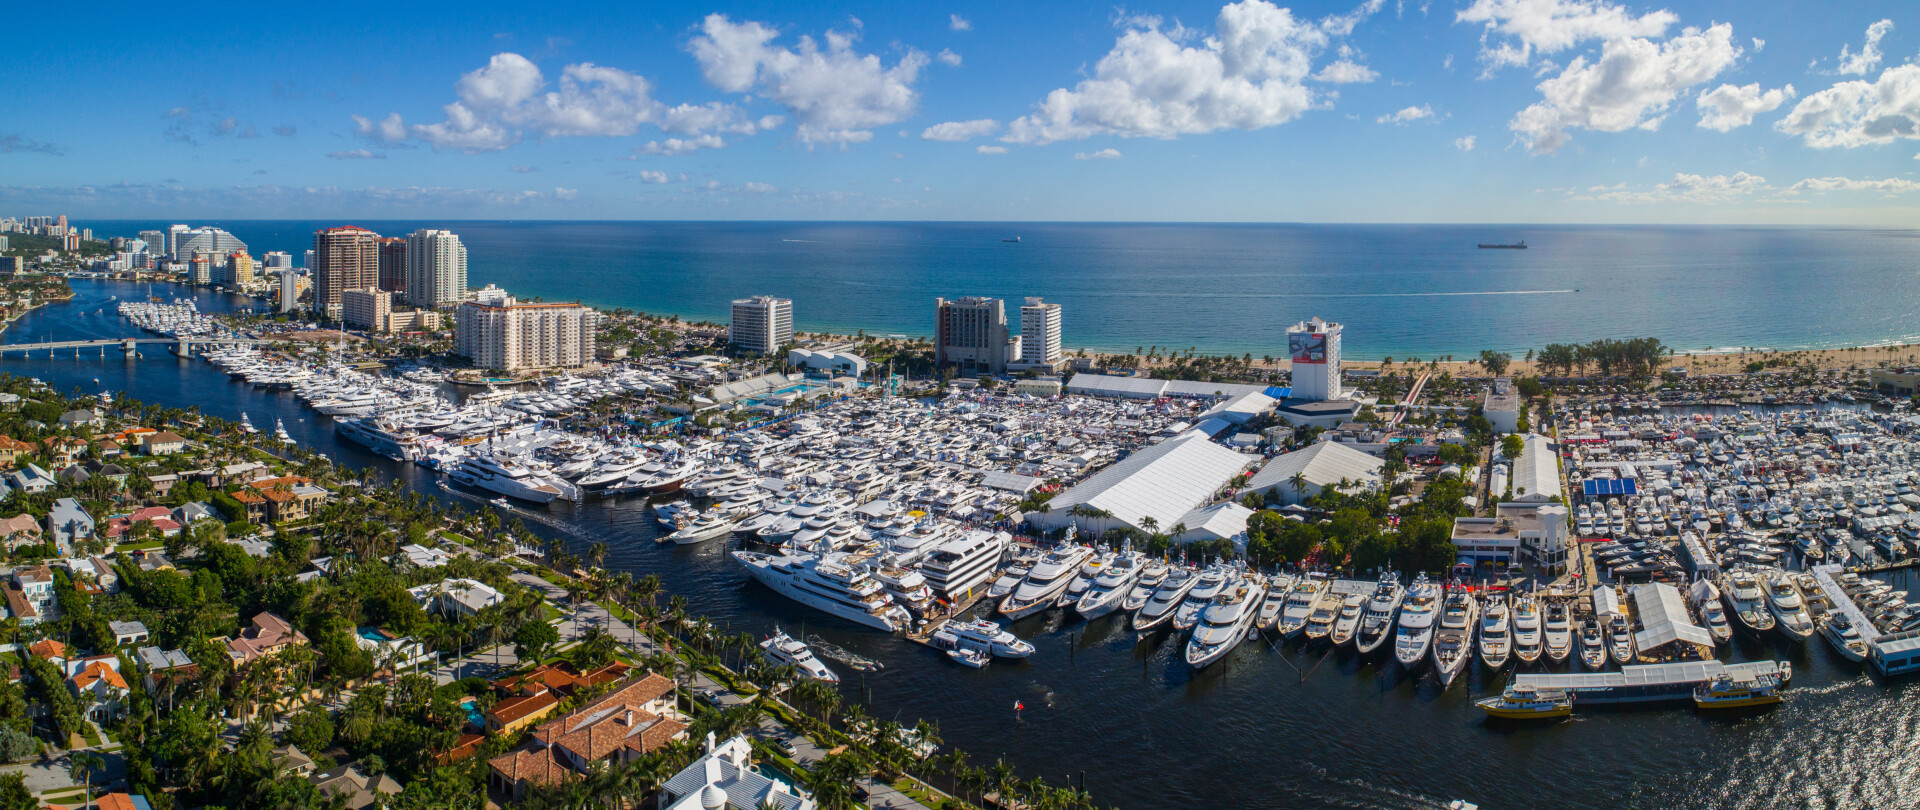 Join Edmiston at the 2022 Fort Lauderdale International Boat Show